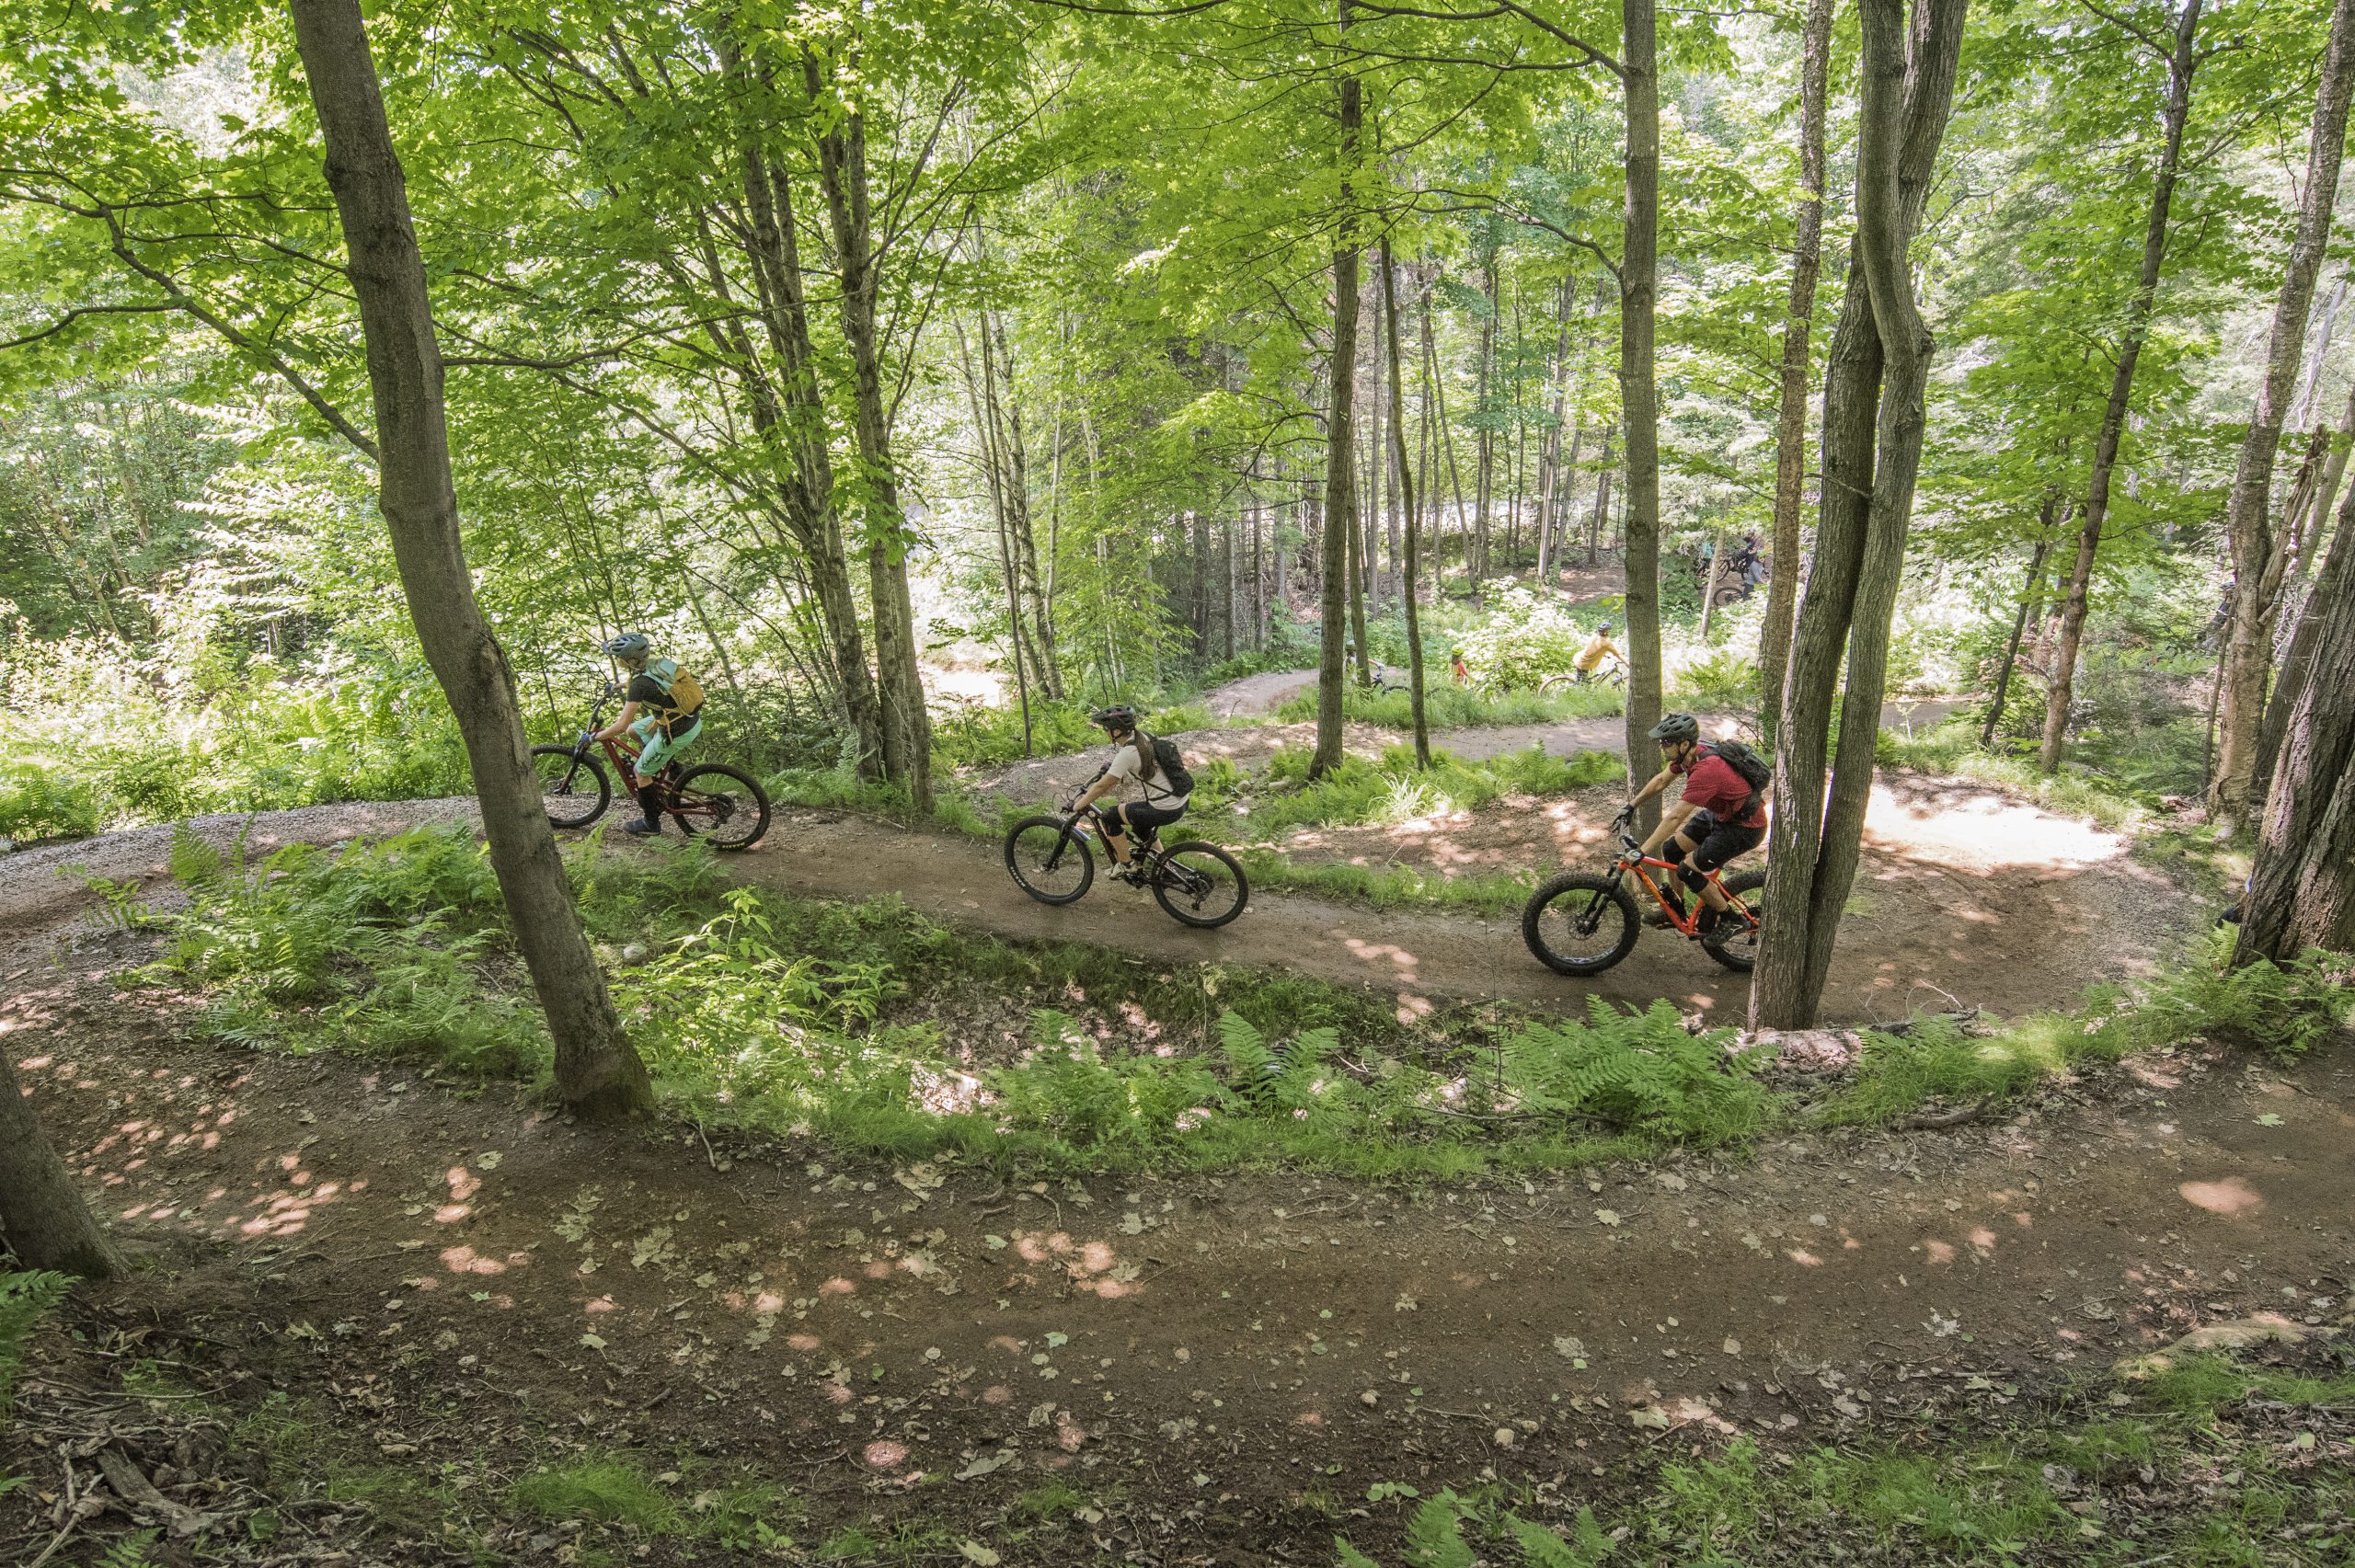 Three cyclists in a row practicing an outdoor activity, mountain biking, on a trail surrounded by nature and forest in the Secteur des Sucrés.